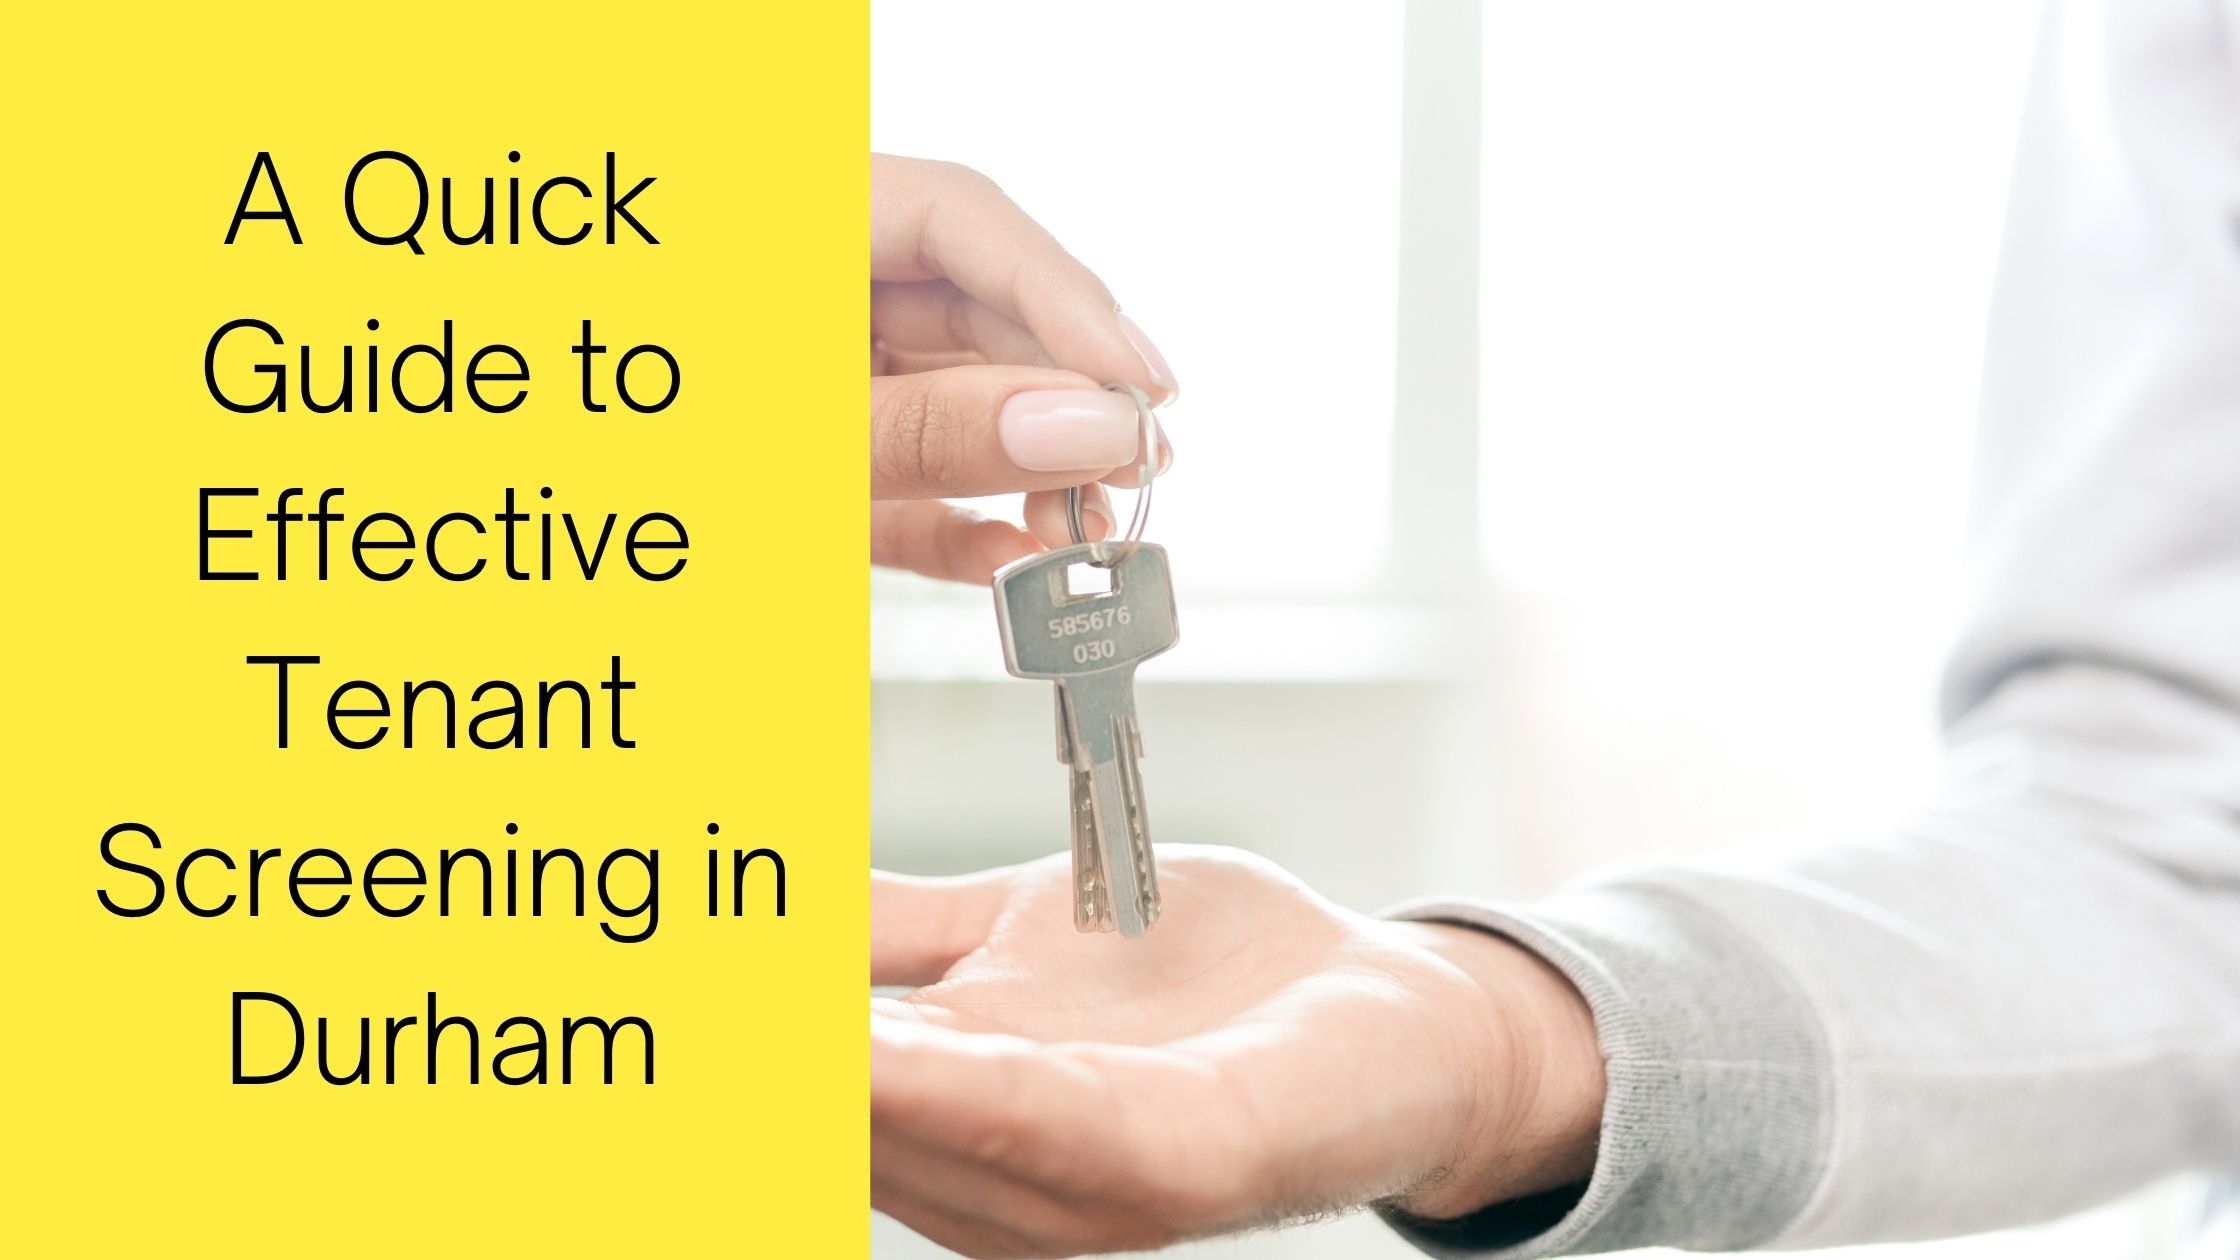 A Quick Guide to Effective Tenant Screening in Durham